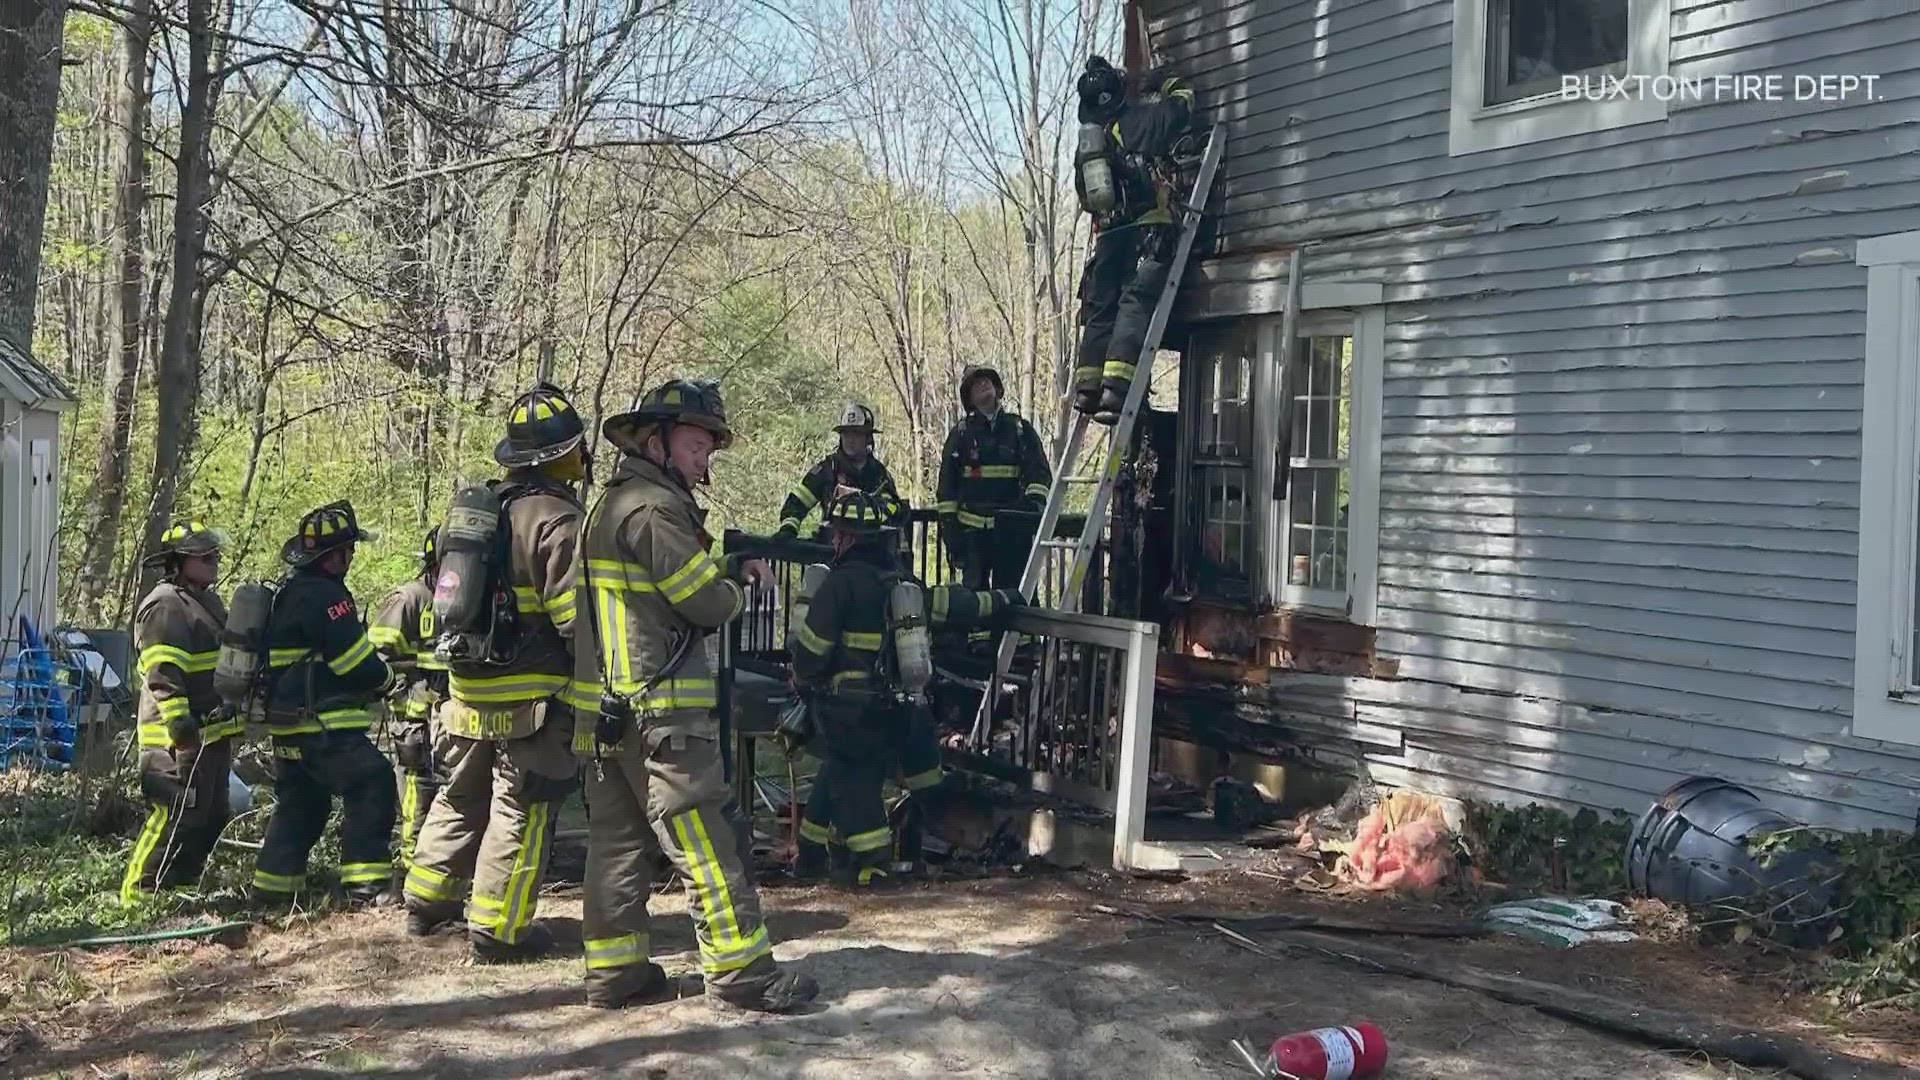 Buxton's fire chief said the fire started because the homeowner reportedly did not appropriately discard cigarette butts.